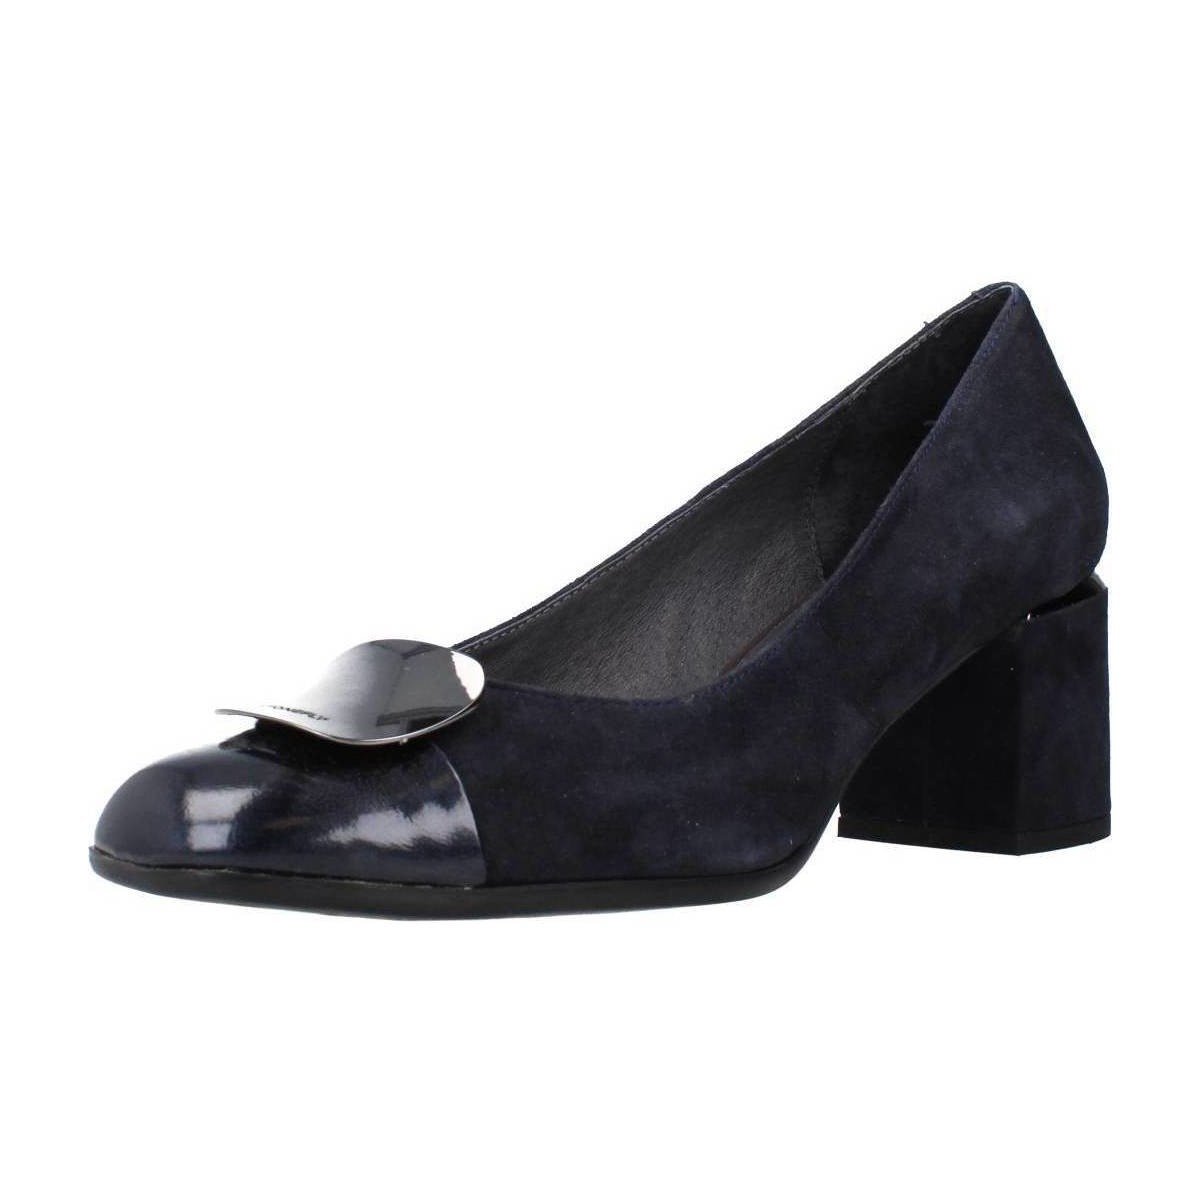 Spartoo - Women's Pumps in Blue - Stonefly GOOFASH